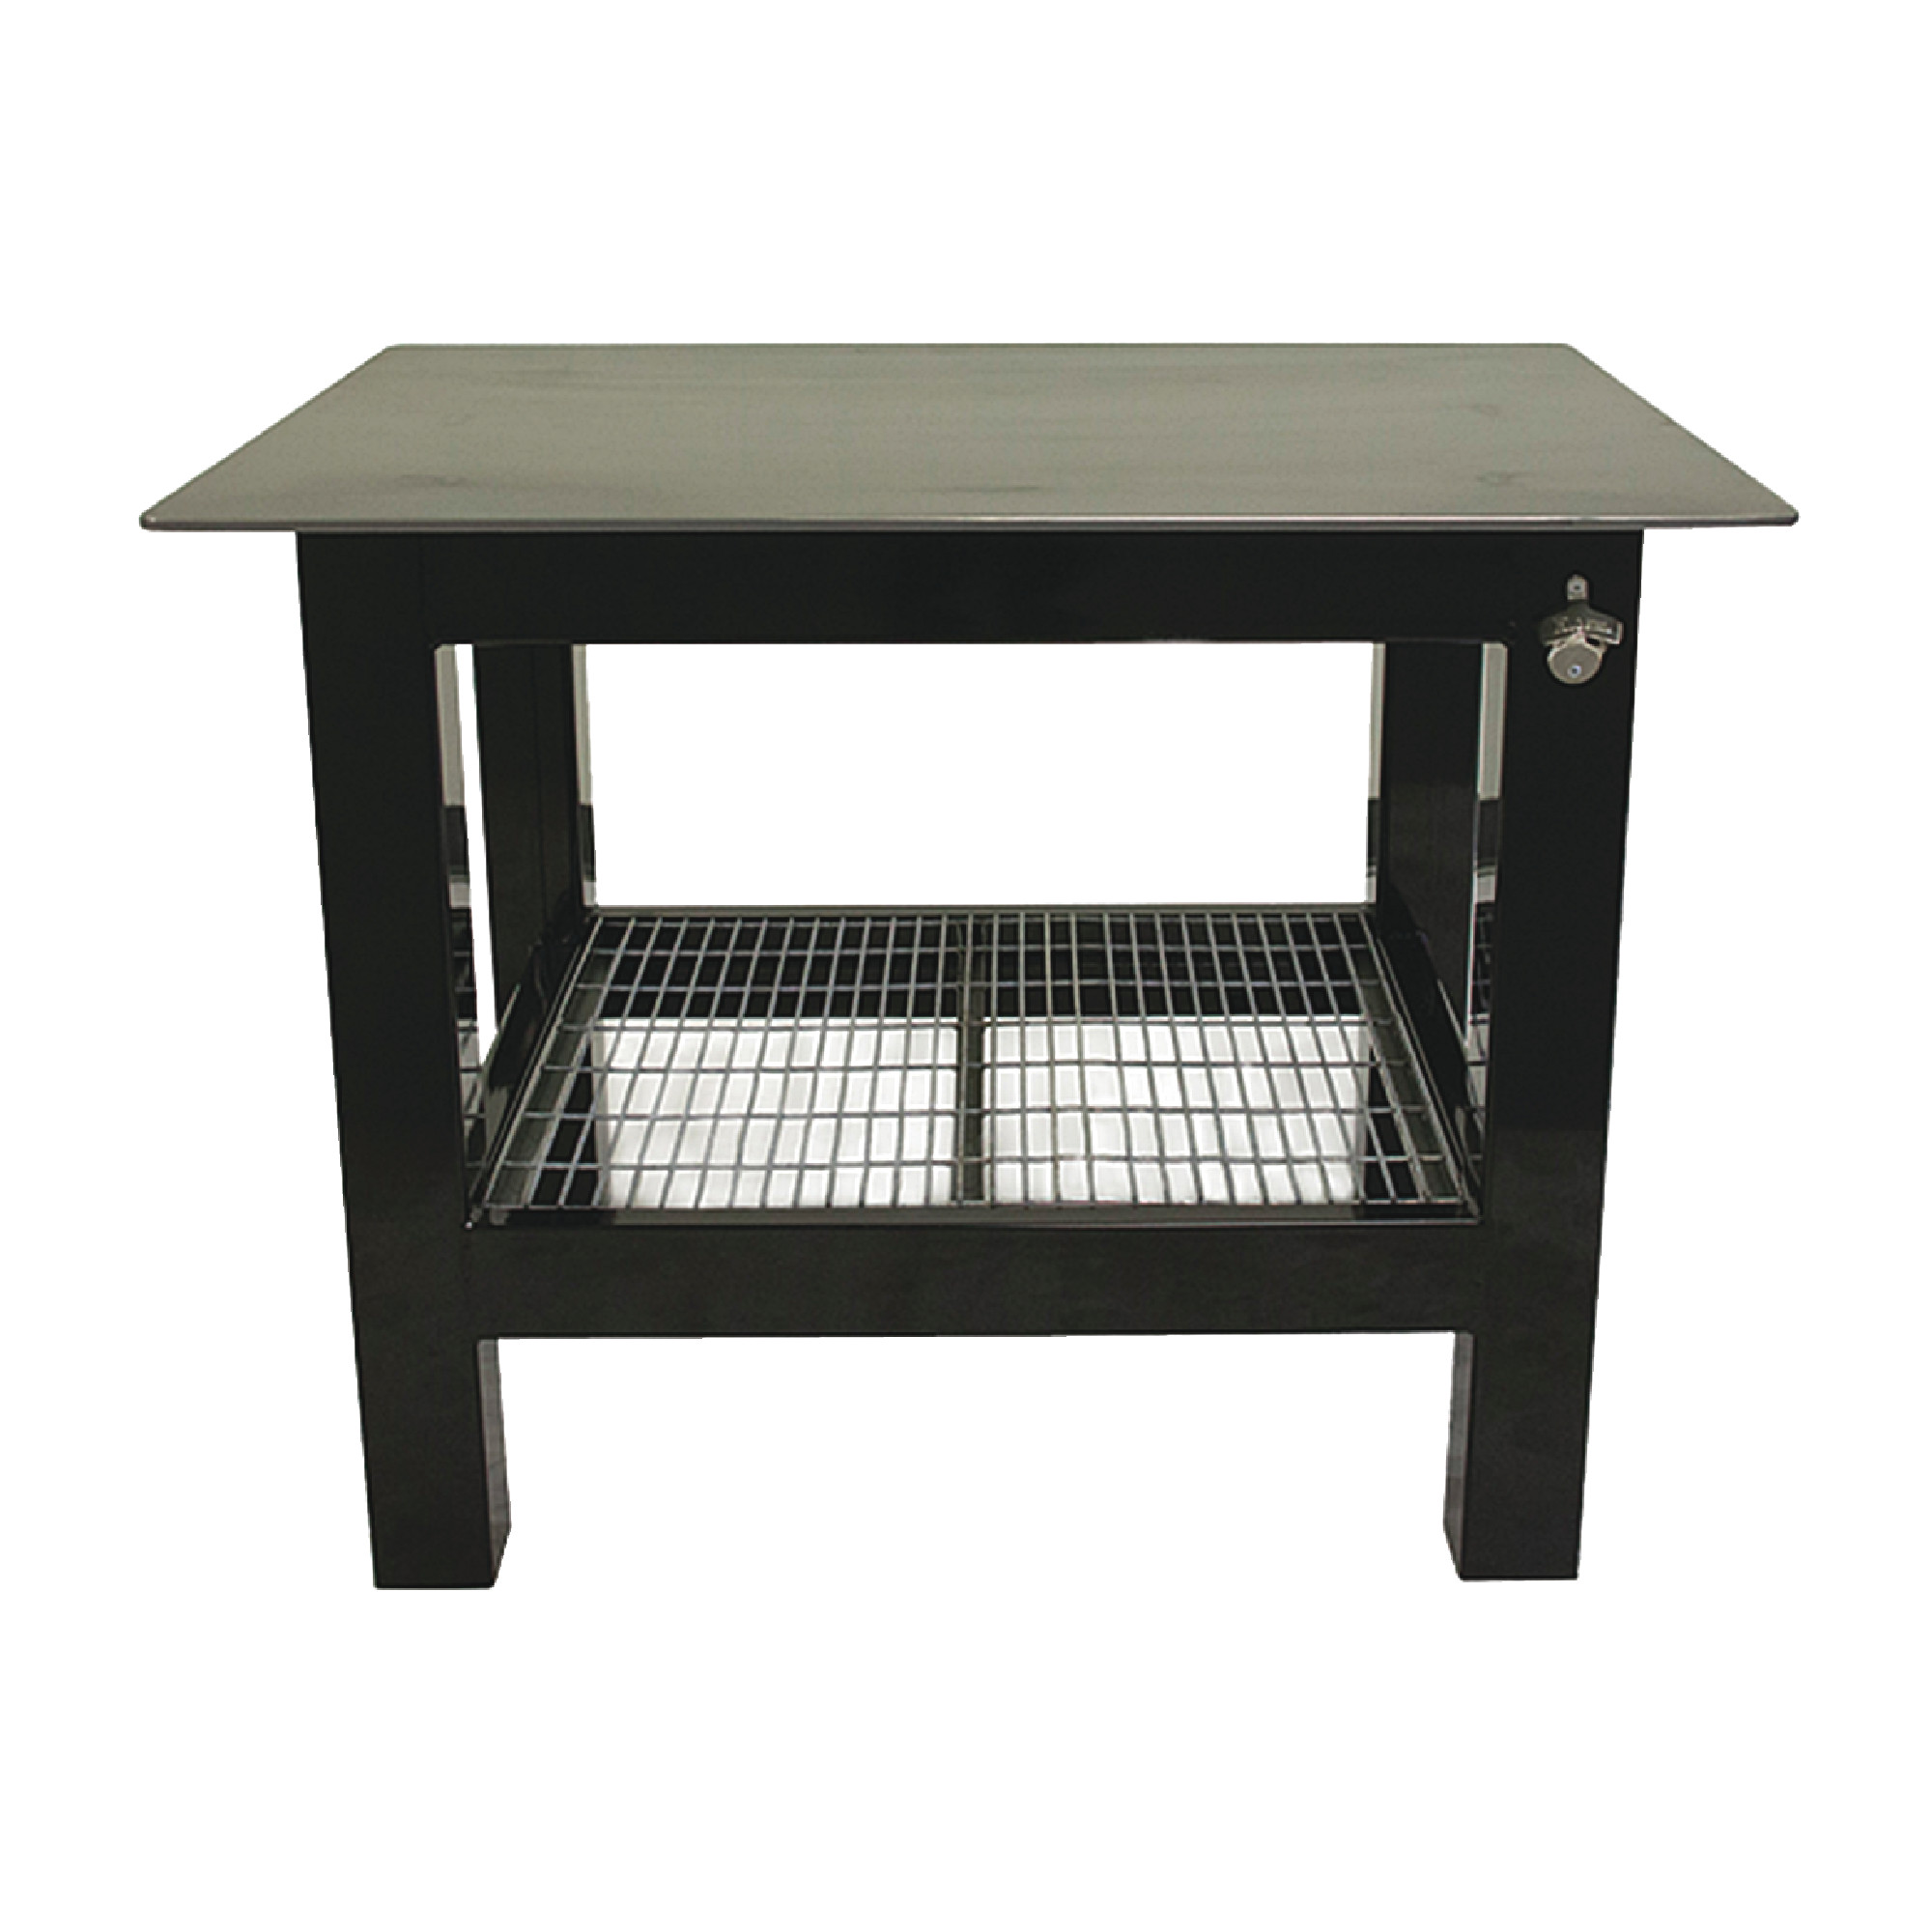 Welding Table With 1/4" Plate Steel Top & Casters